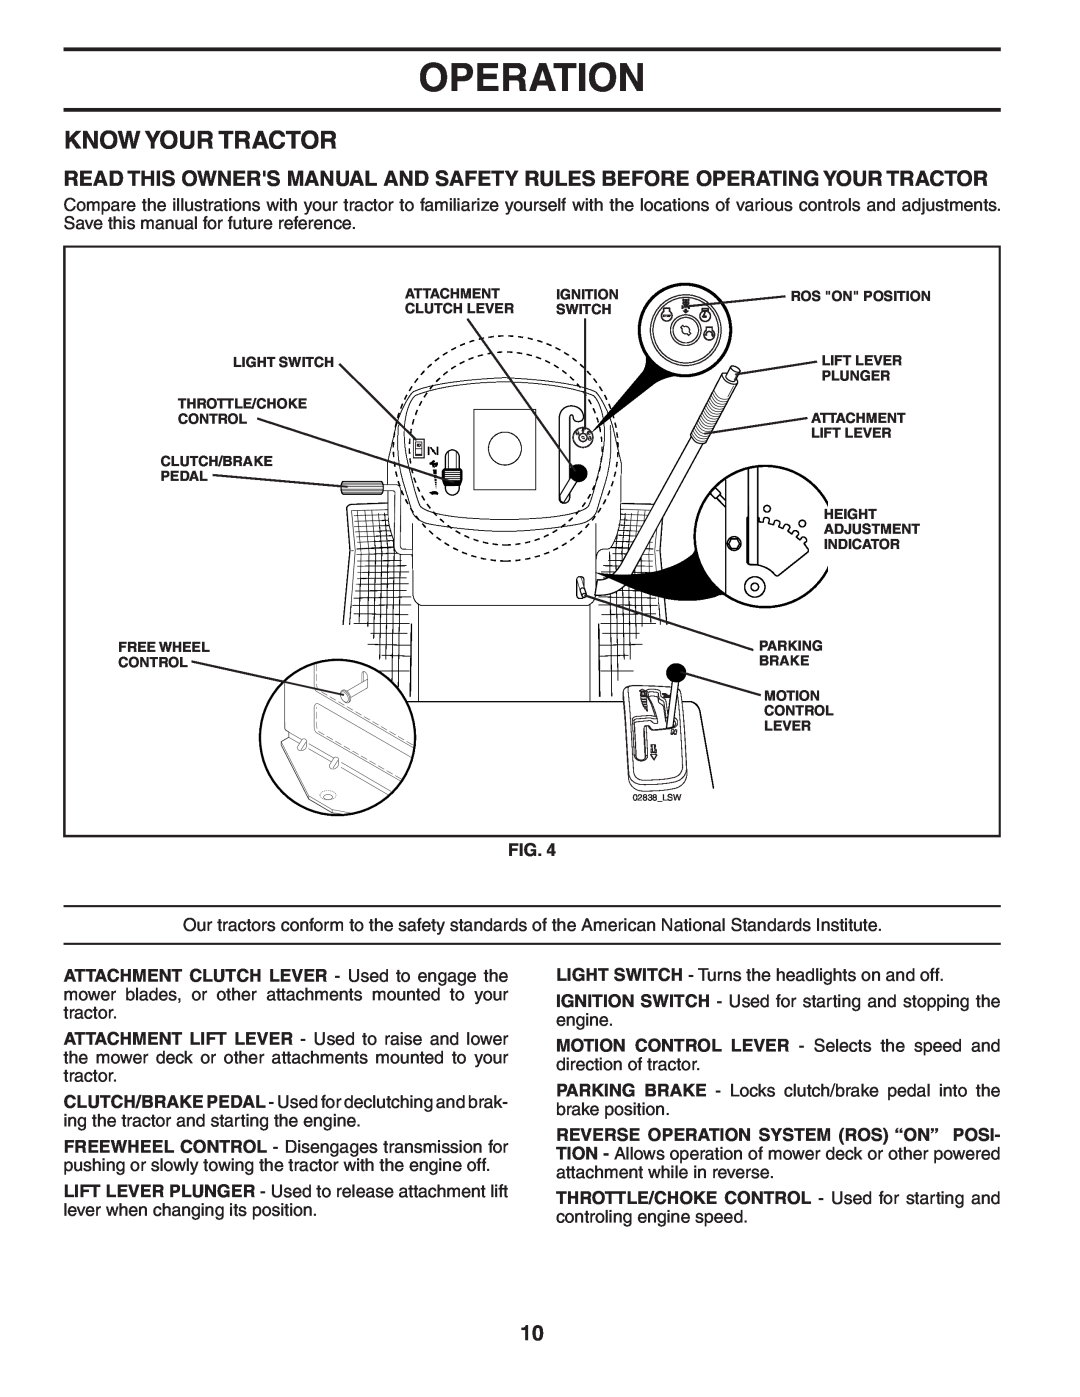 Poulan HD20H42 manual Know Your Tractor, Operation 